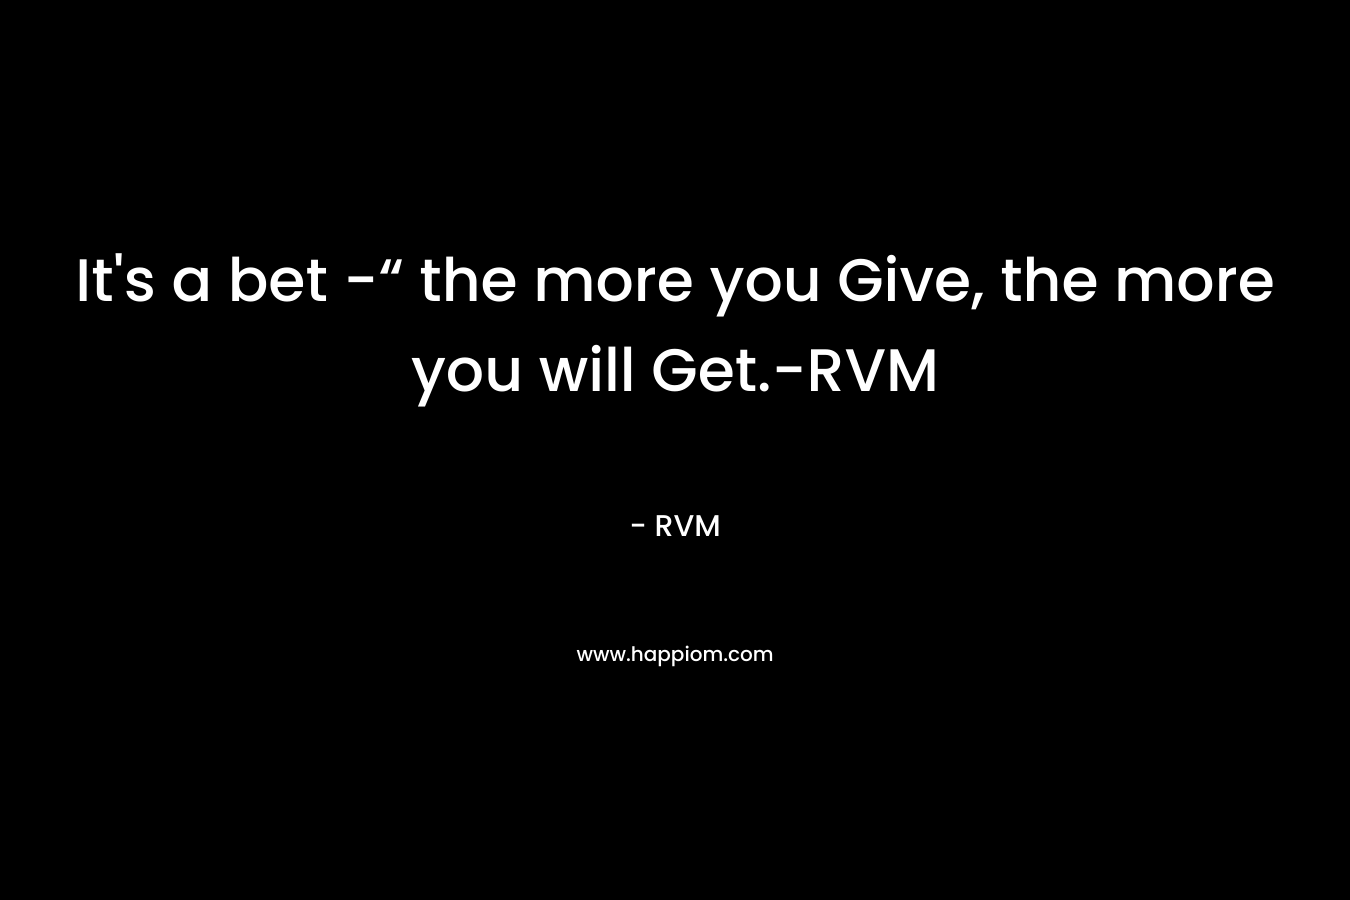 It's a bet -“ the more you Give, the more you will Get.-RVM